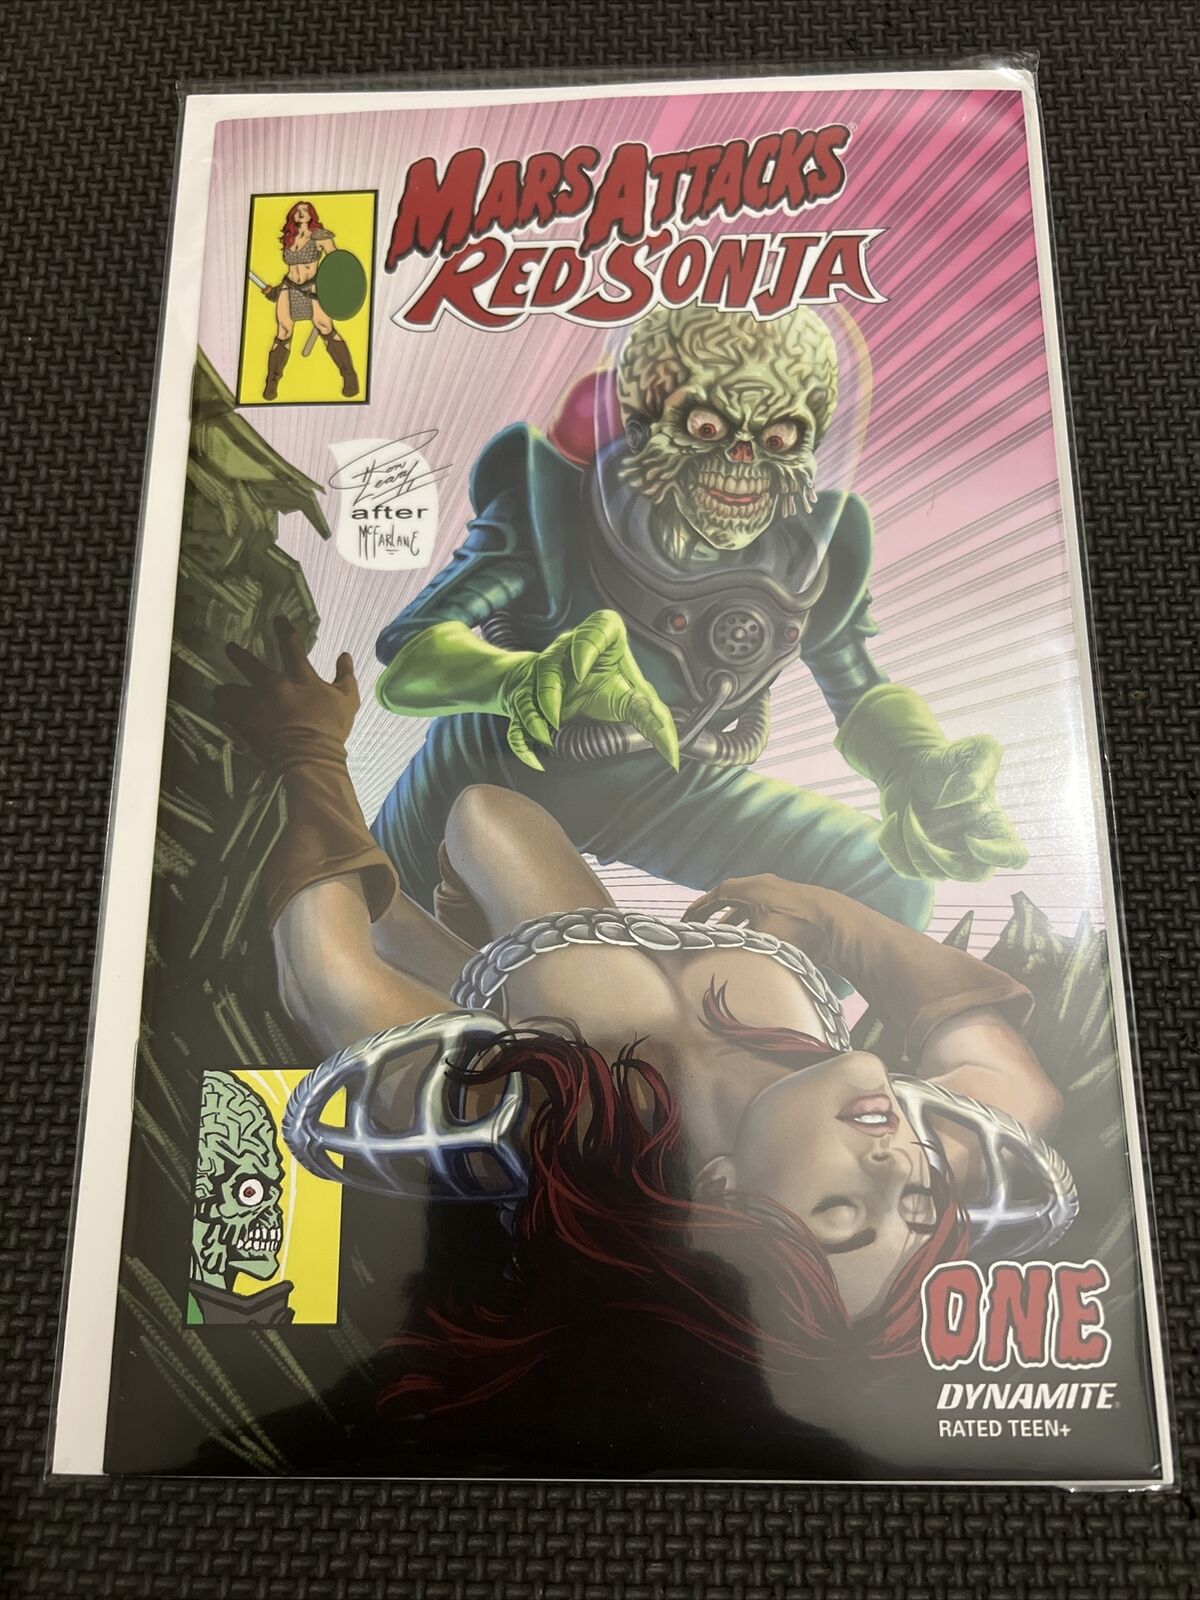 Mars Attacks Red Sonja #1 Ron Leary After McFarlane Exclusive Variant Comic Book